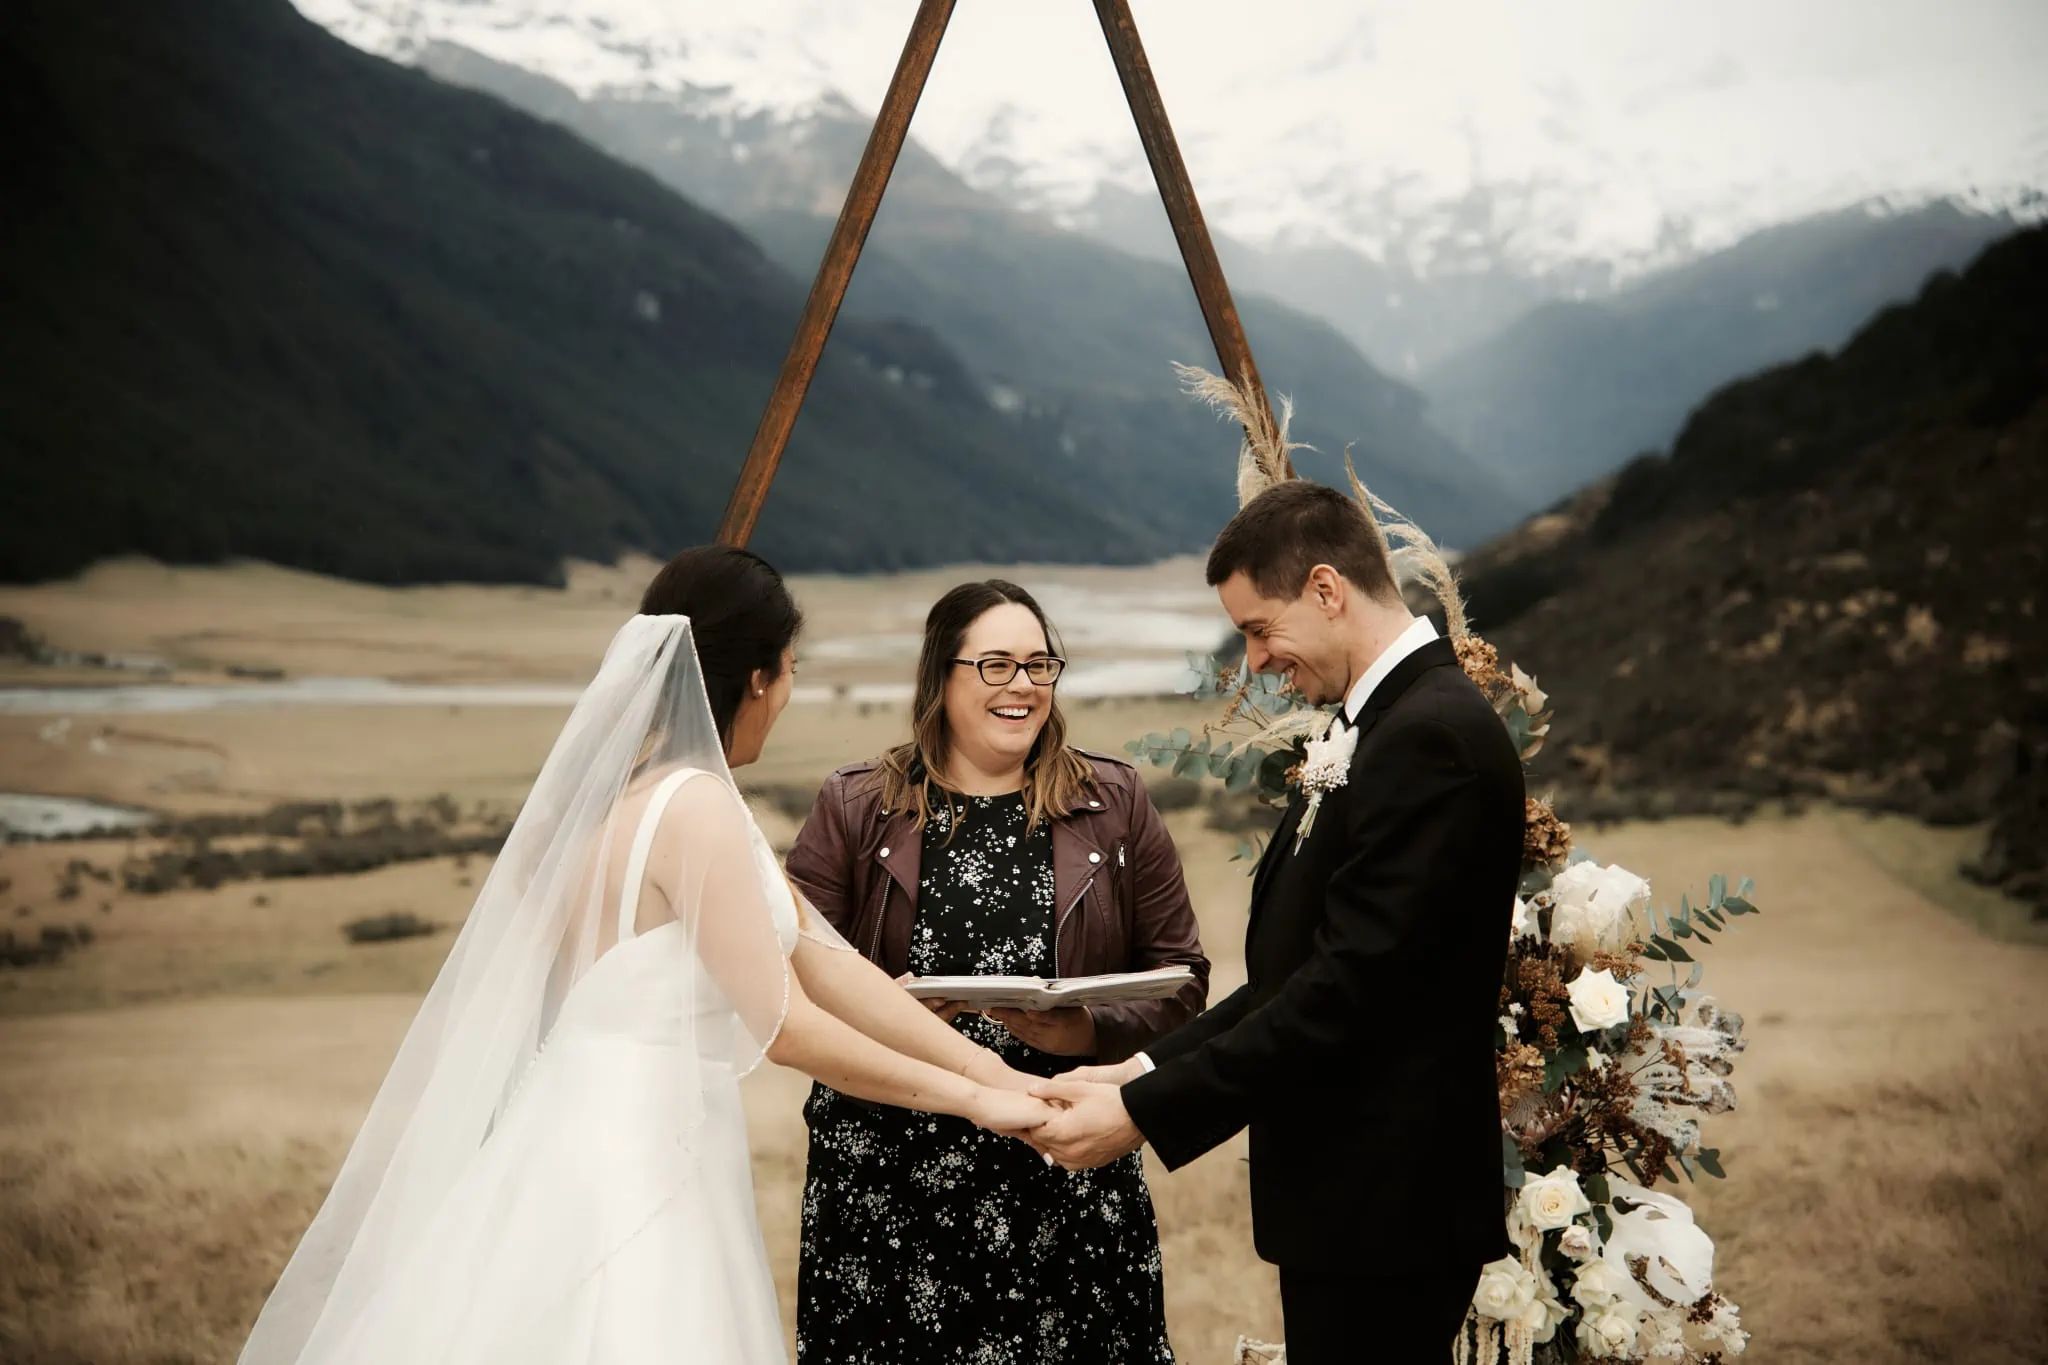 Michelle and Vedran's Rees Valley Station elopement wedding in front of majestic mountains.